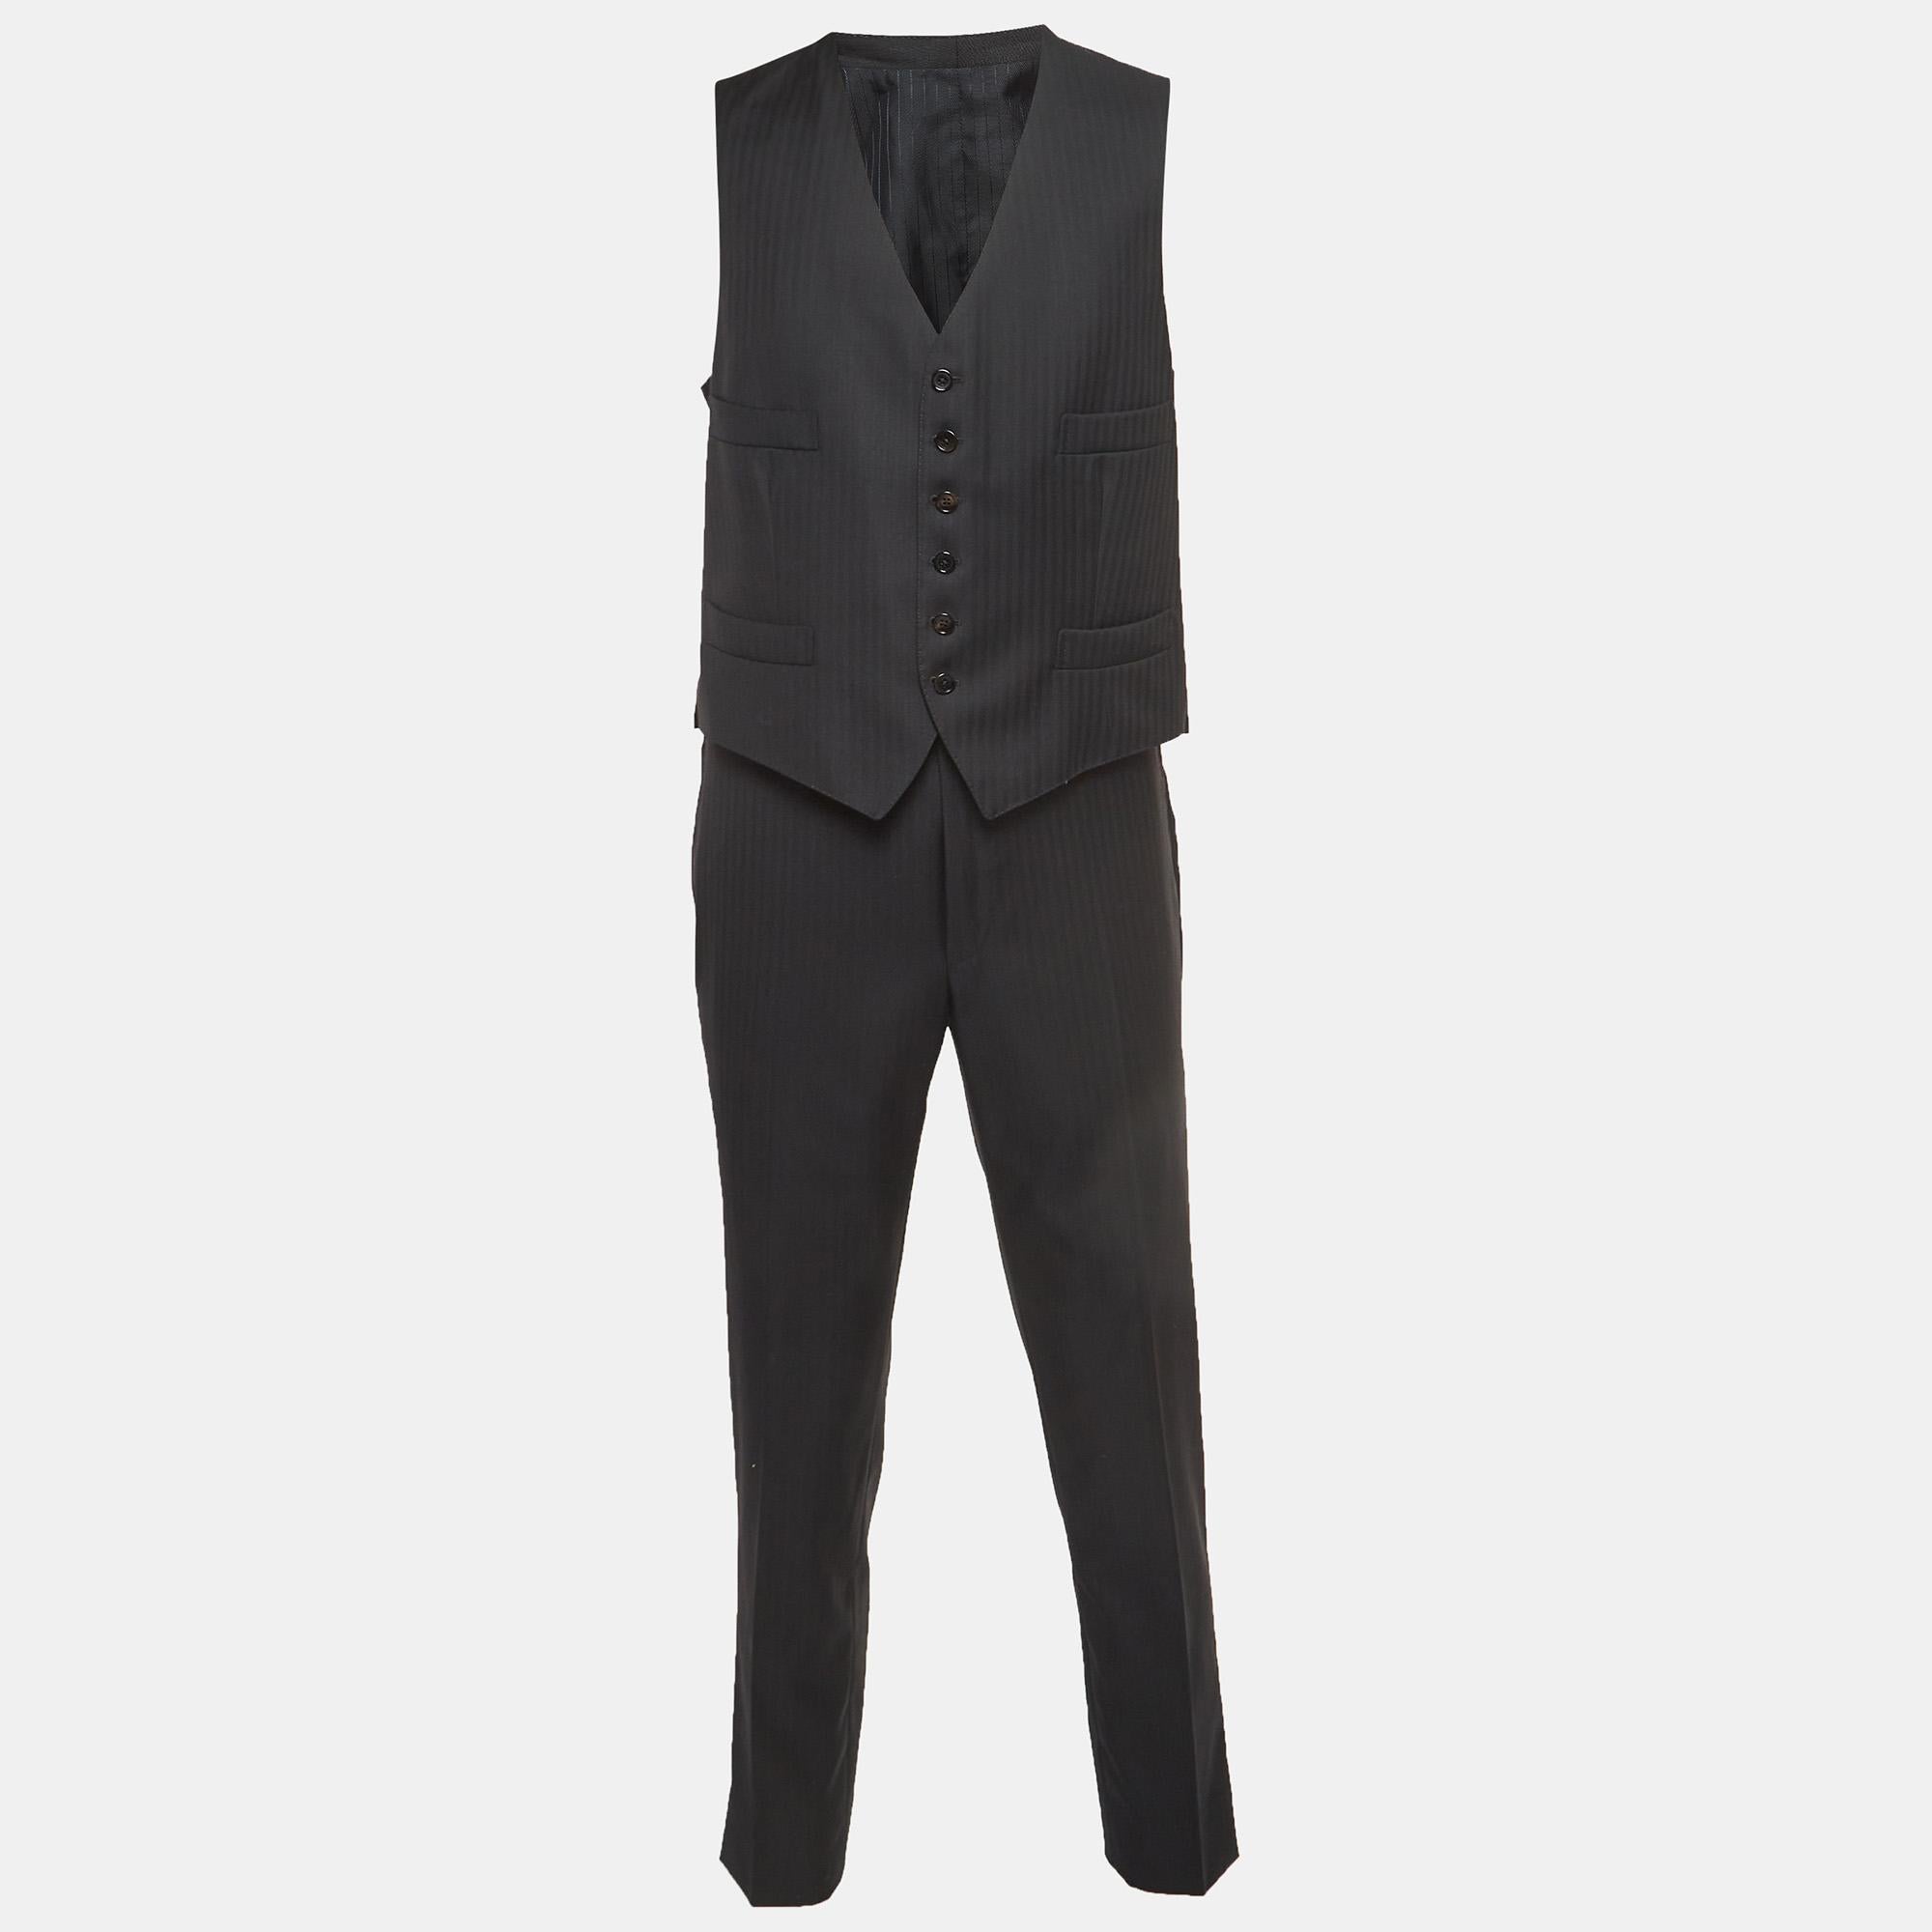 Characterized by impeccable tailoring, a good fit, and the use of quality materials, this Tom Ford suit will help you serve refined looks. Style the suit with oxfords or derby shoes for a stylish finish.

